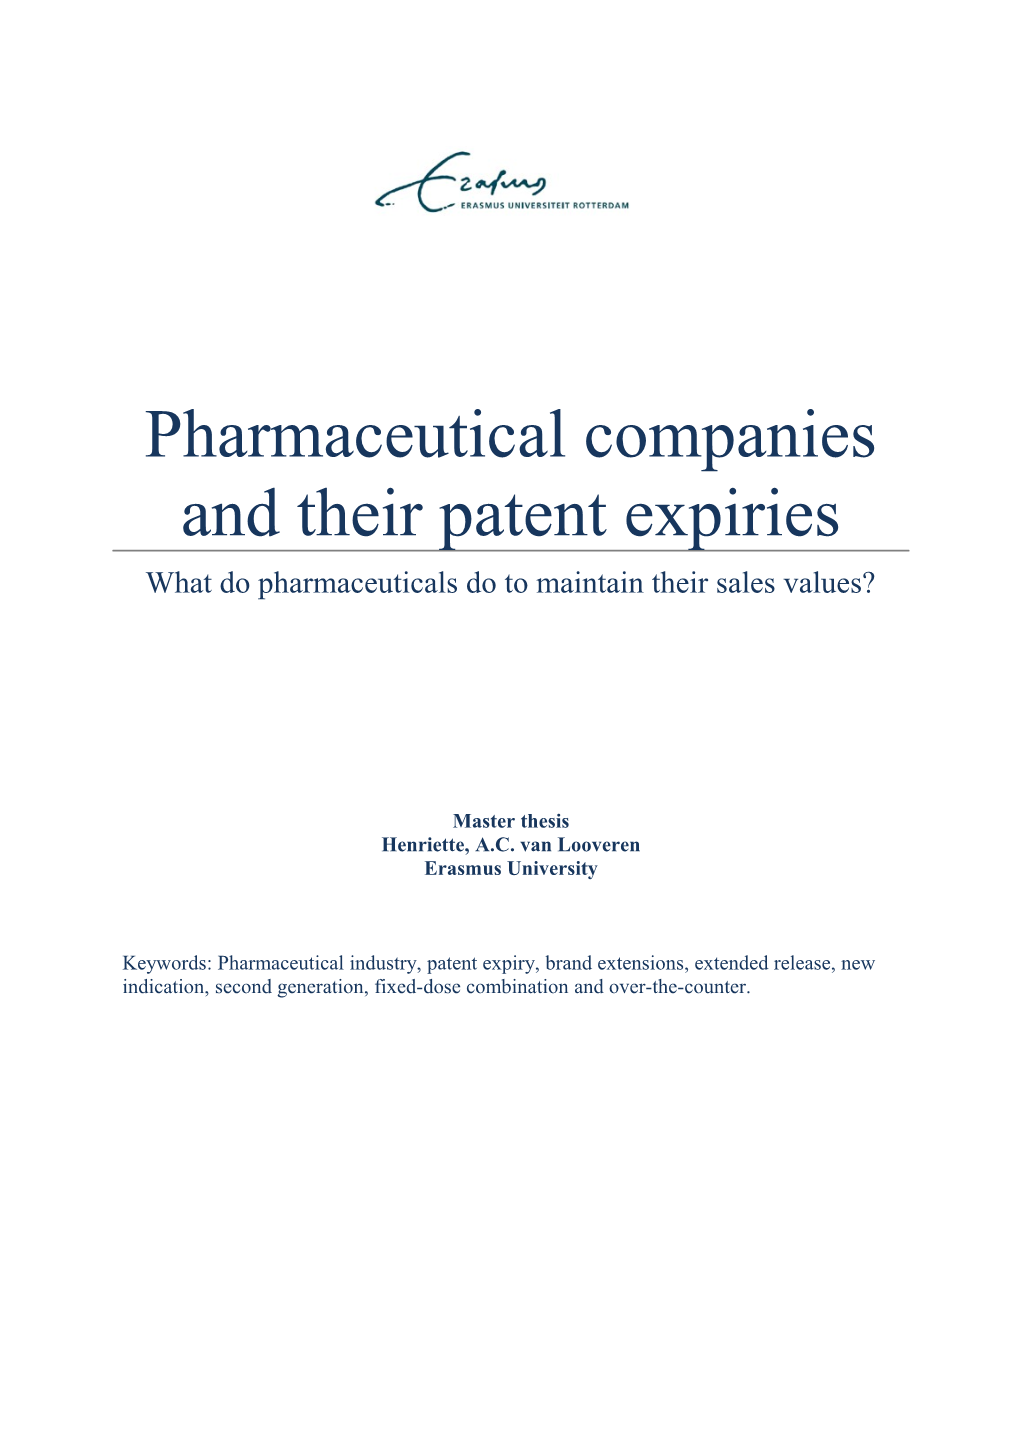 Pharmaceutical Companies and Their Patent Expiries